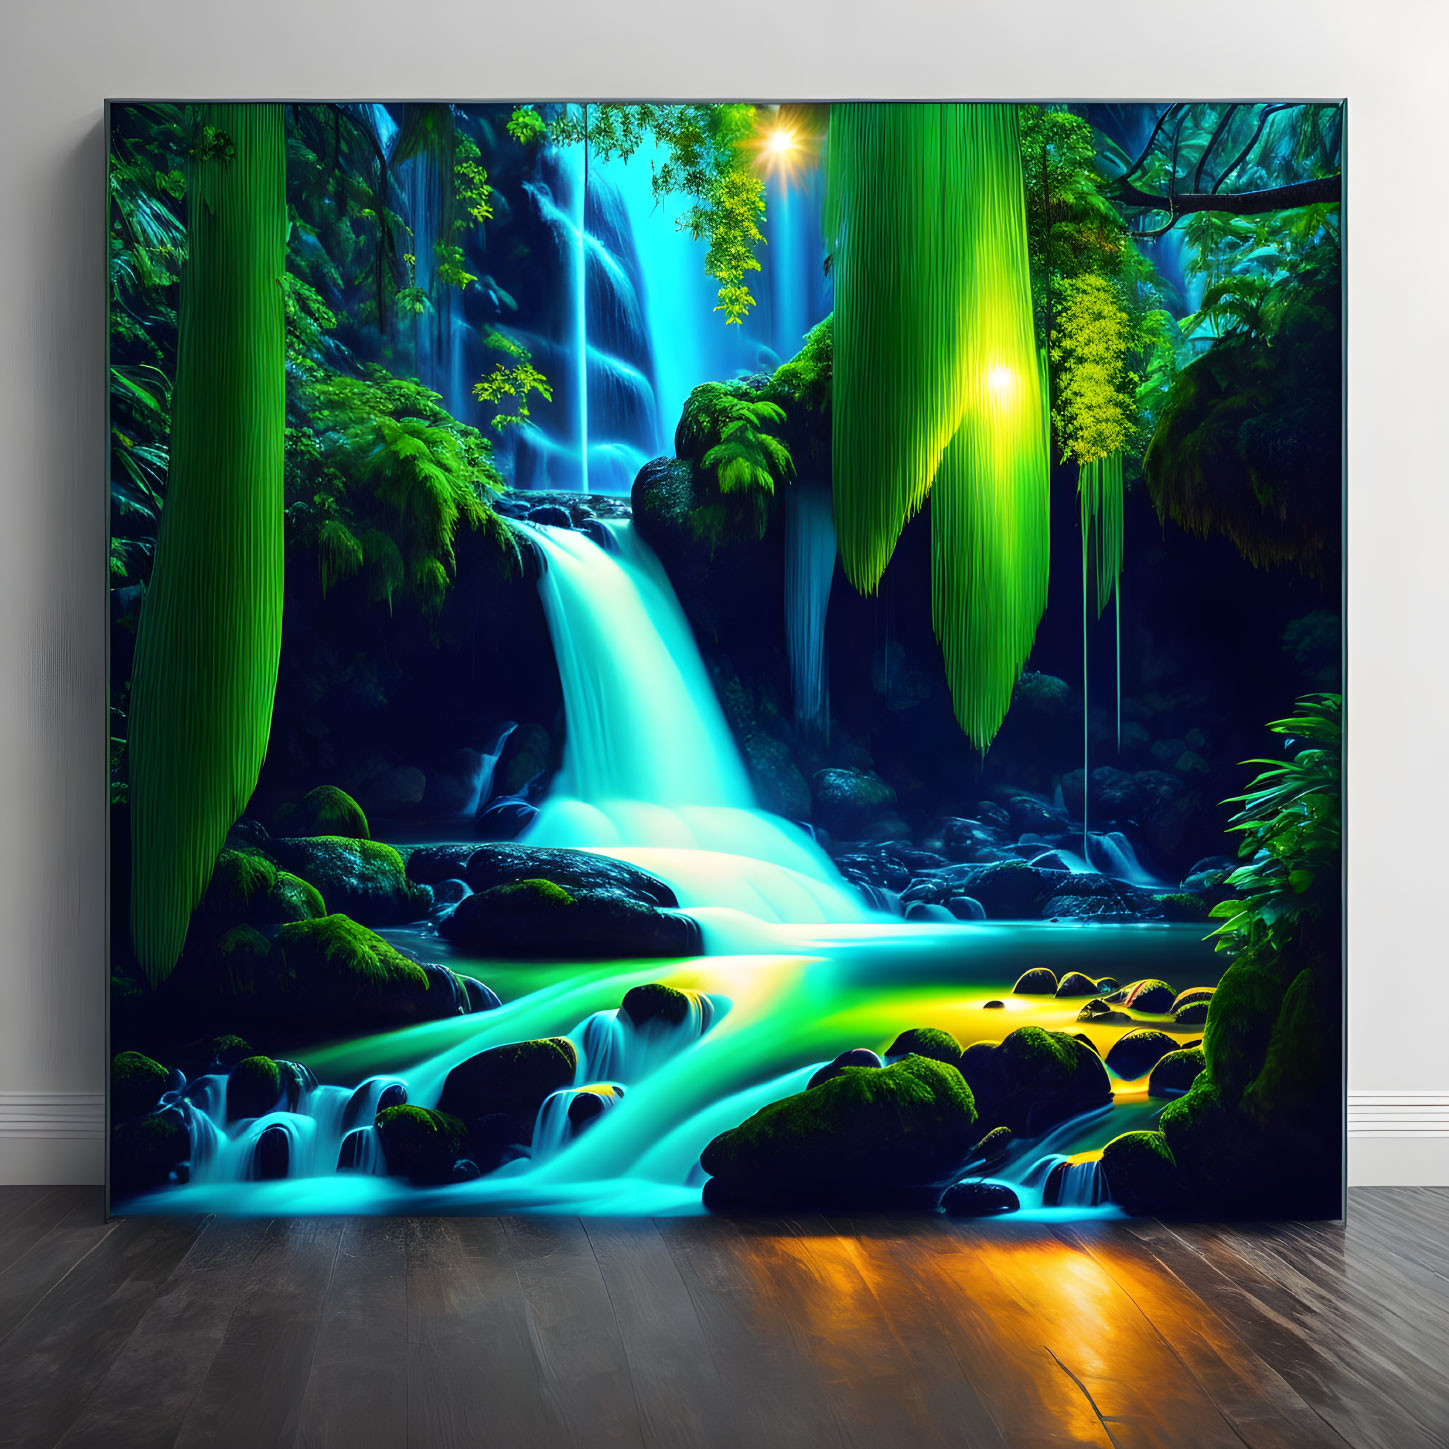 Vibrant waterfall painting with blue waters and forest backdrop